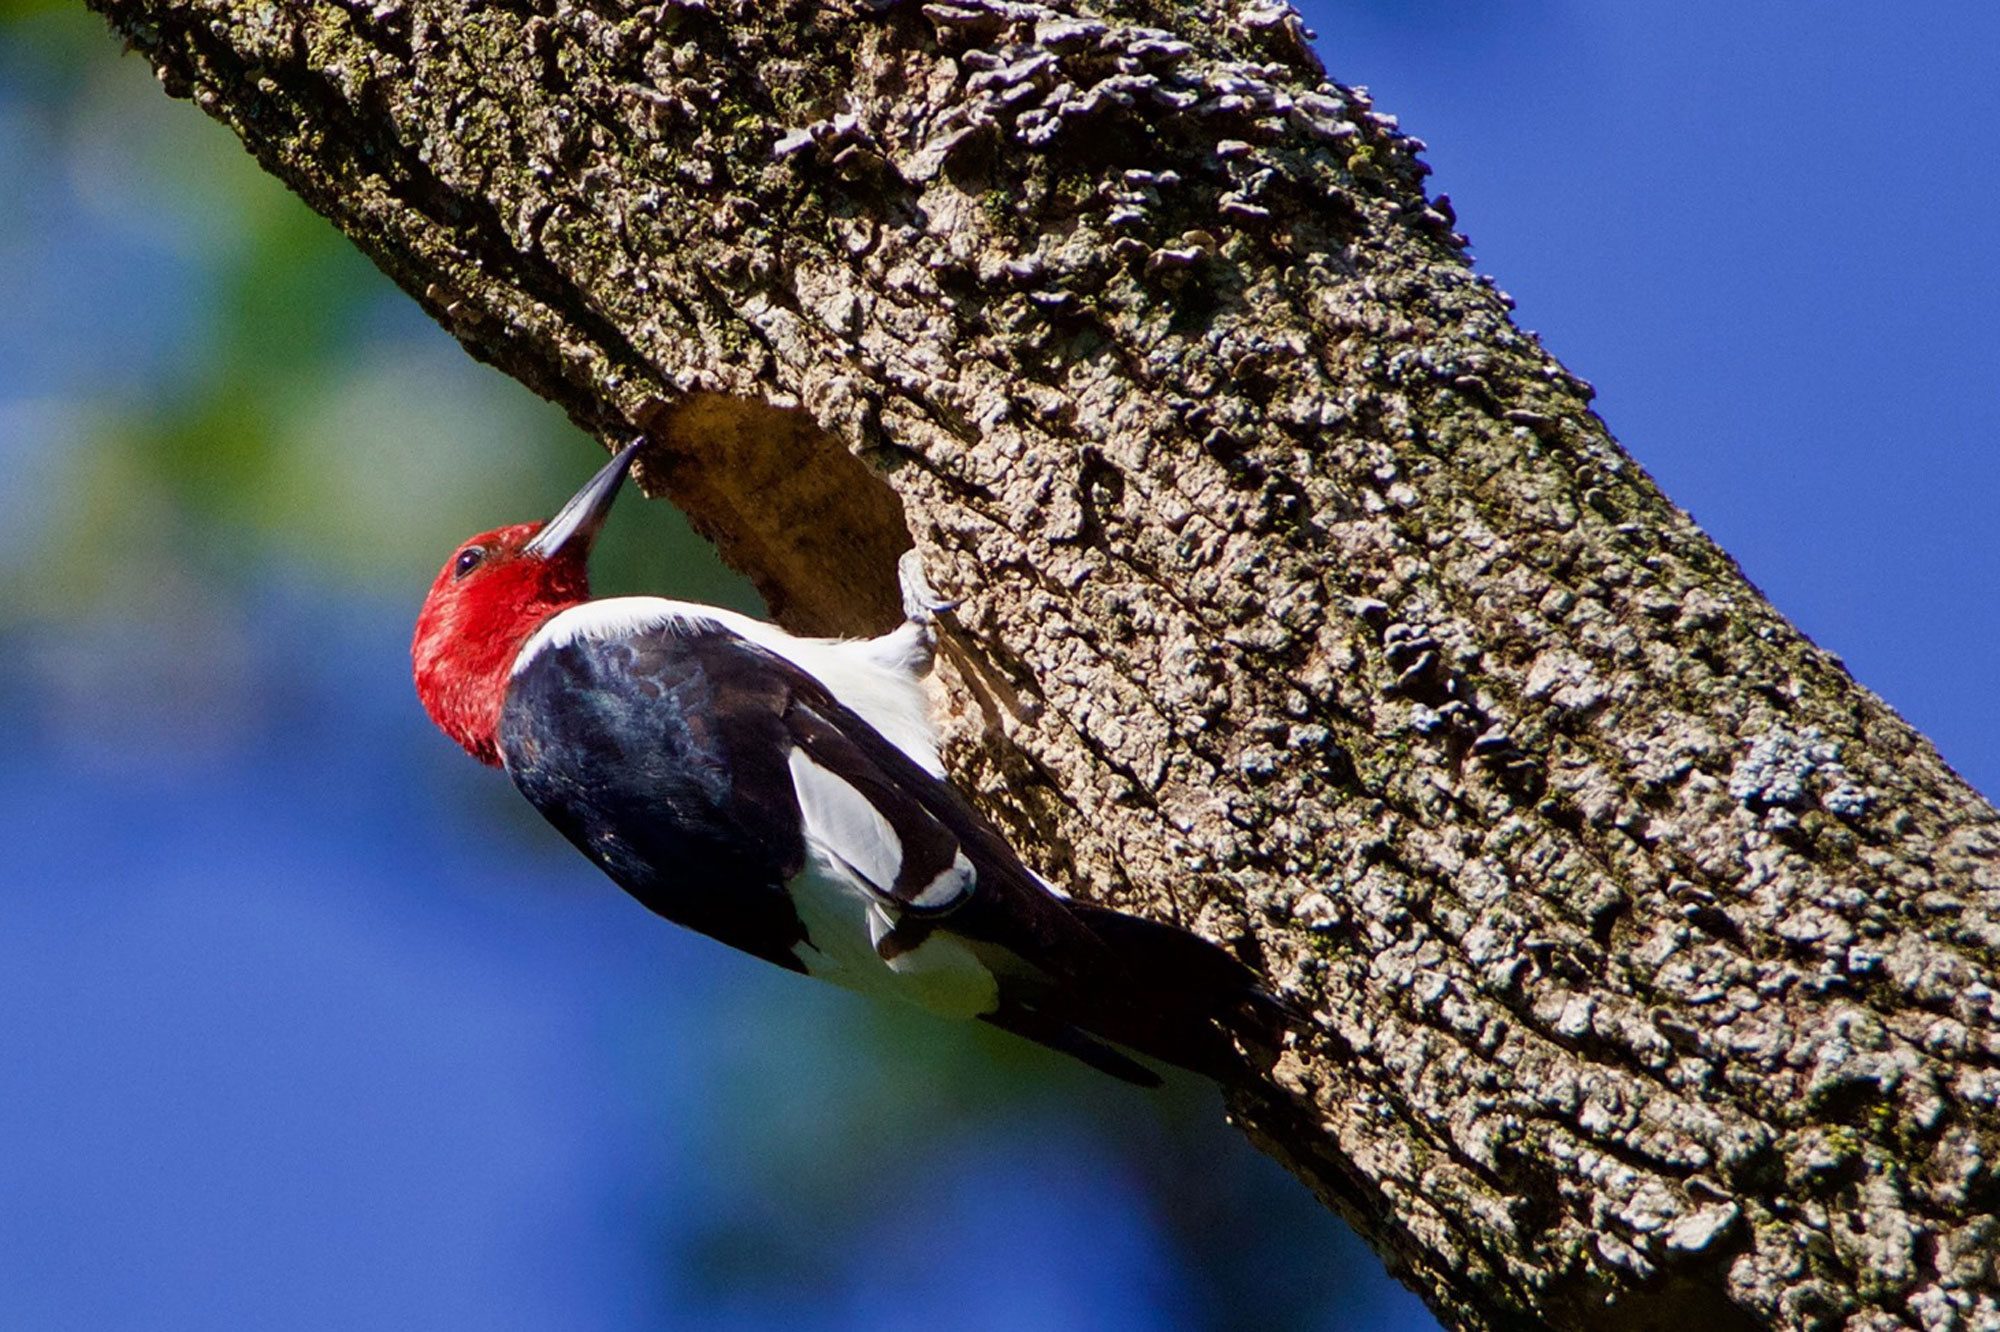 Telltale sights, Sounds of woodpeckers, Nature's presence, Wildlife indications, 2000x1340 HD Desktop